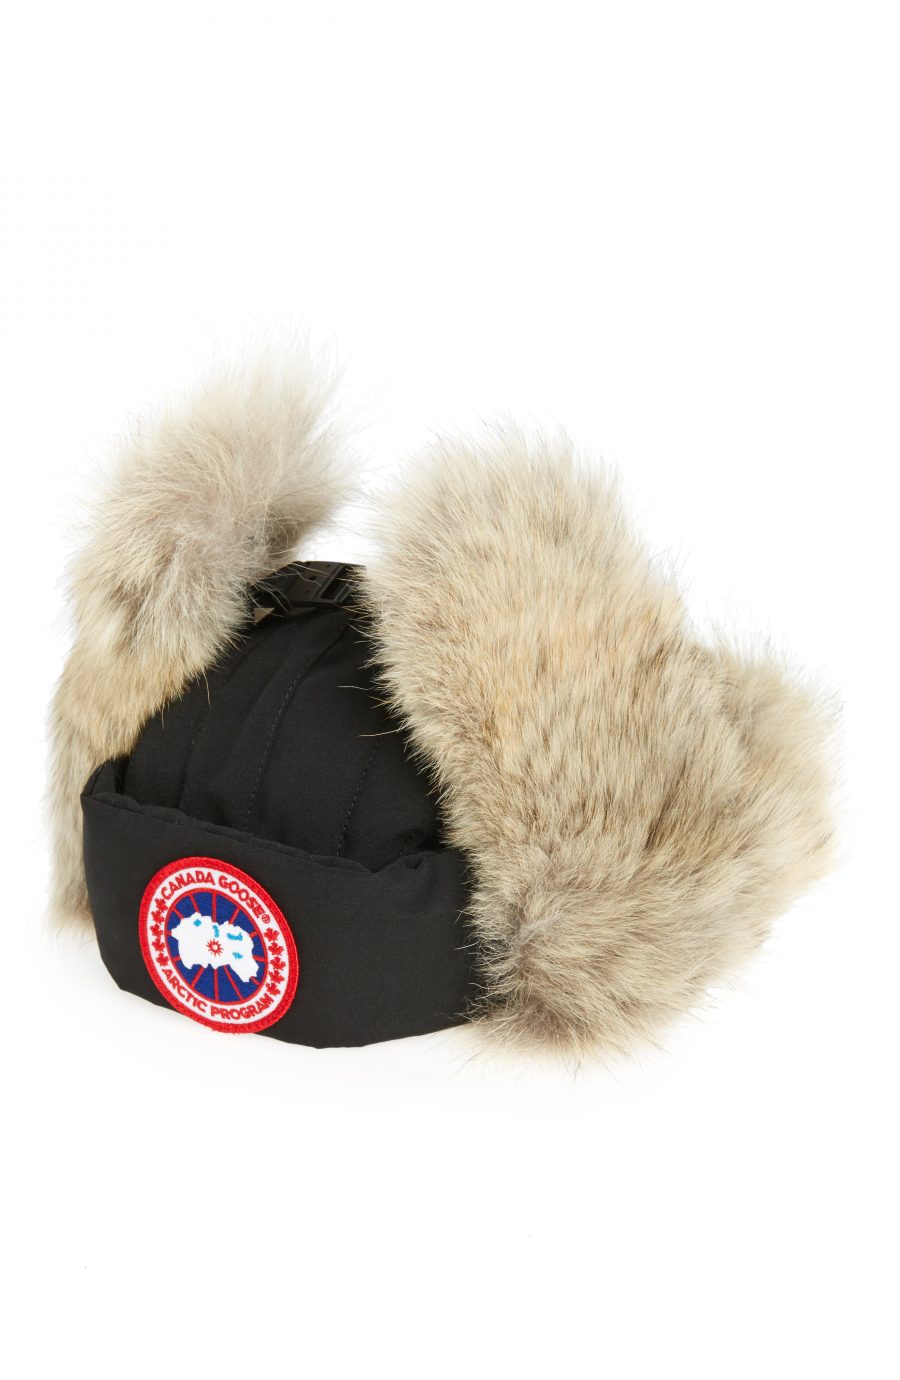 Men’s Canada Goose Down Fill Aviator Hat With Genuine